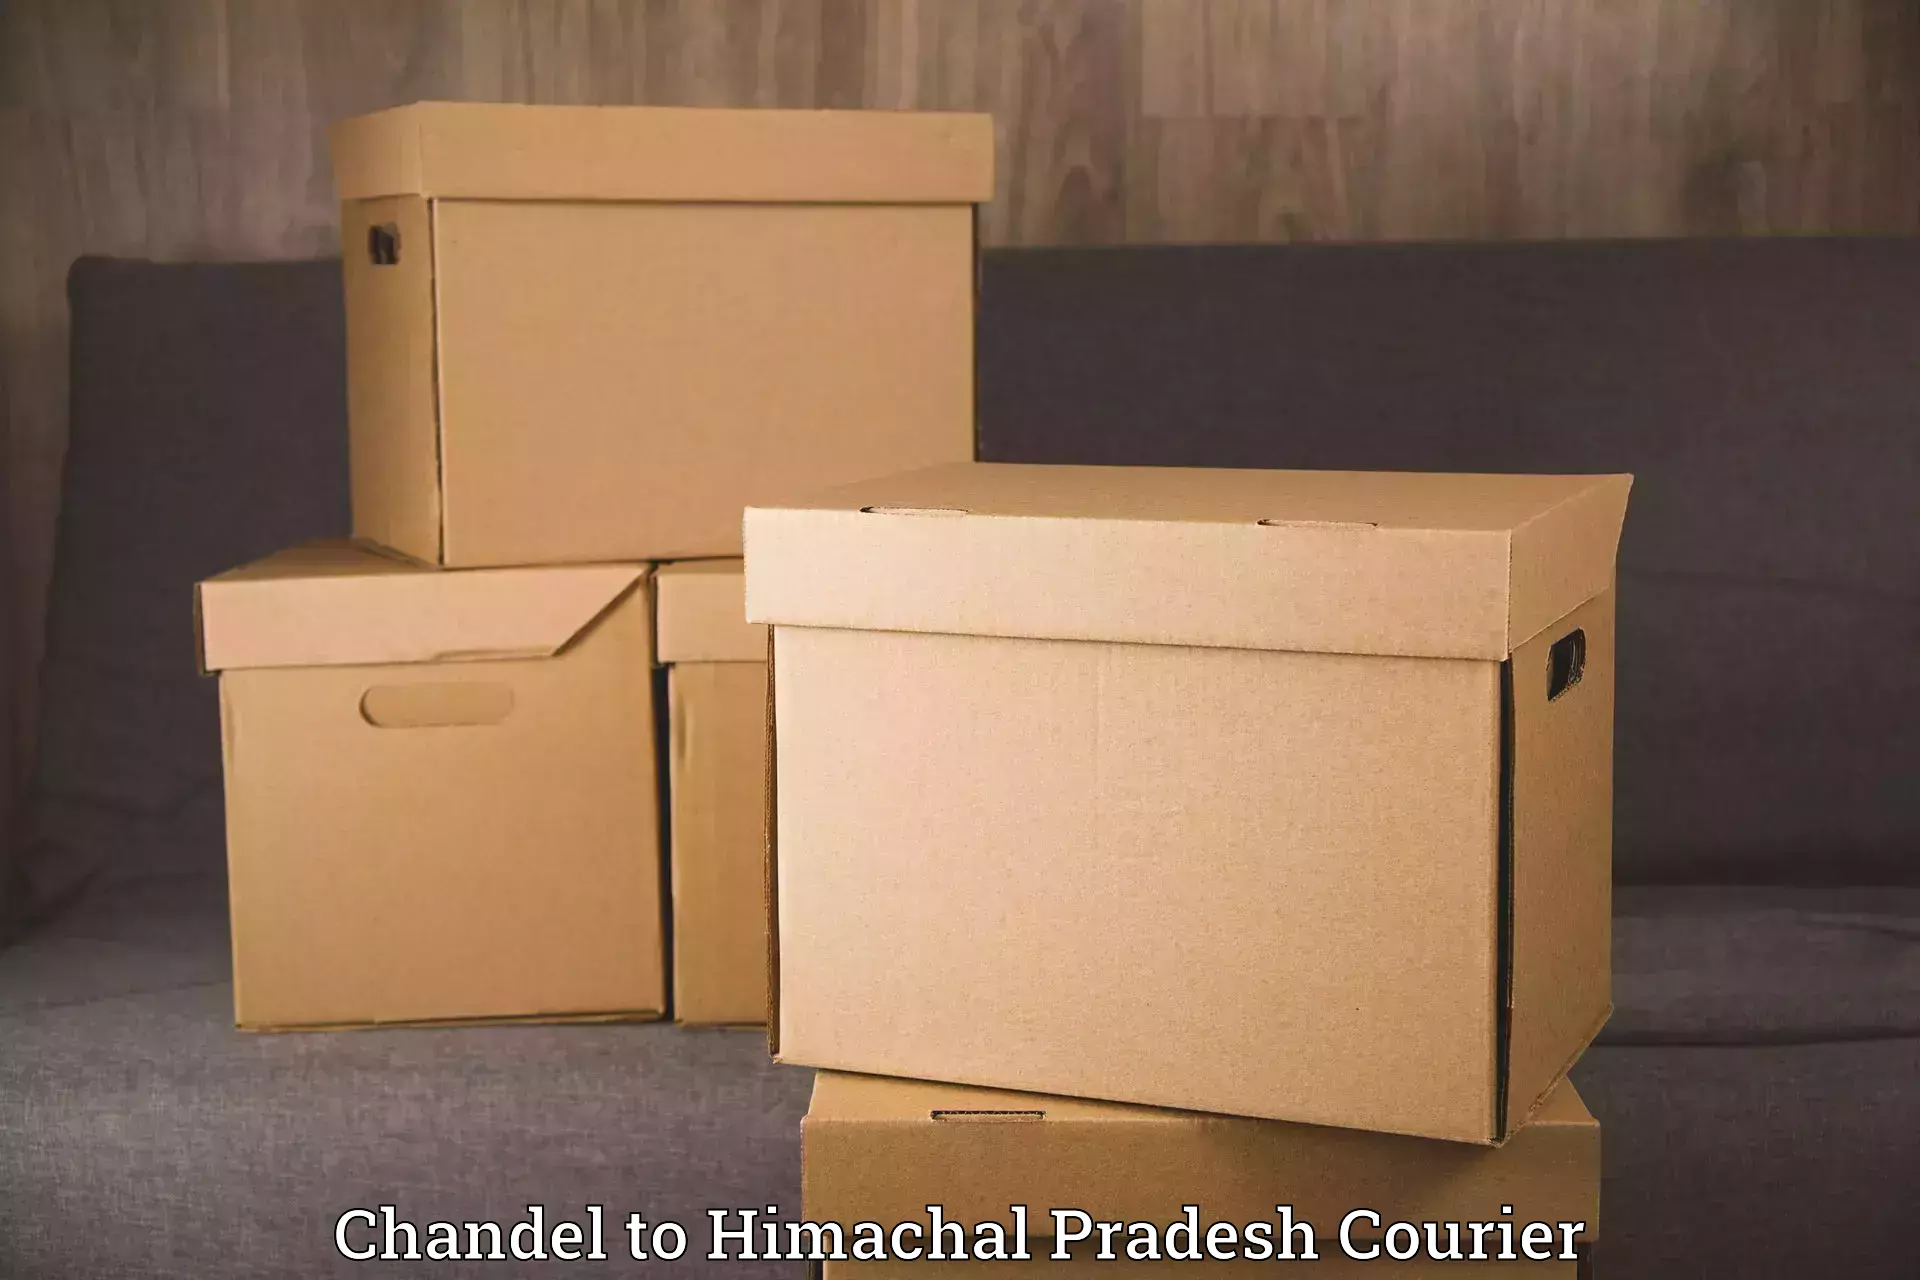 Efficient packing and moving Chandel to Jukhala